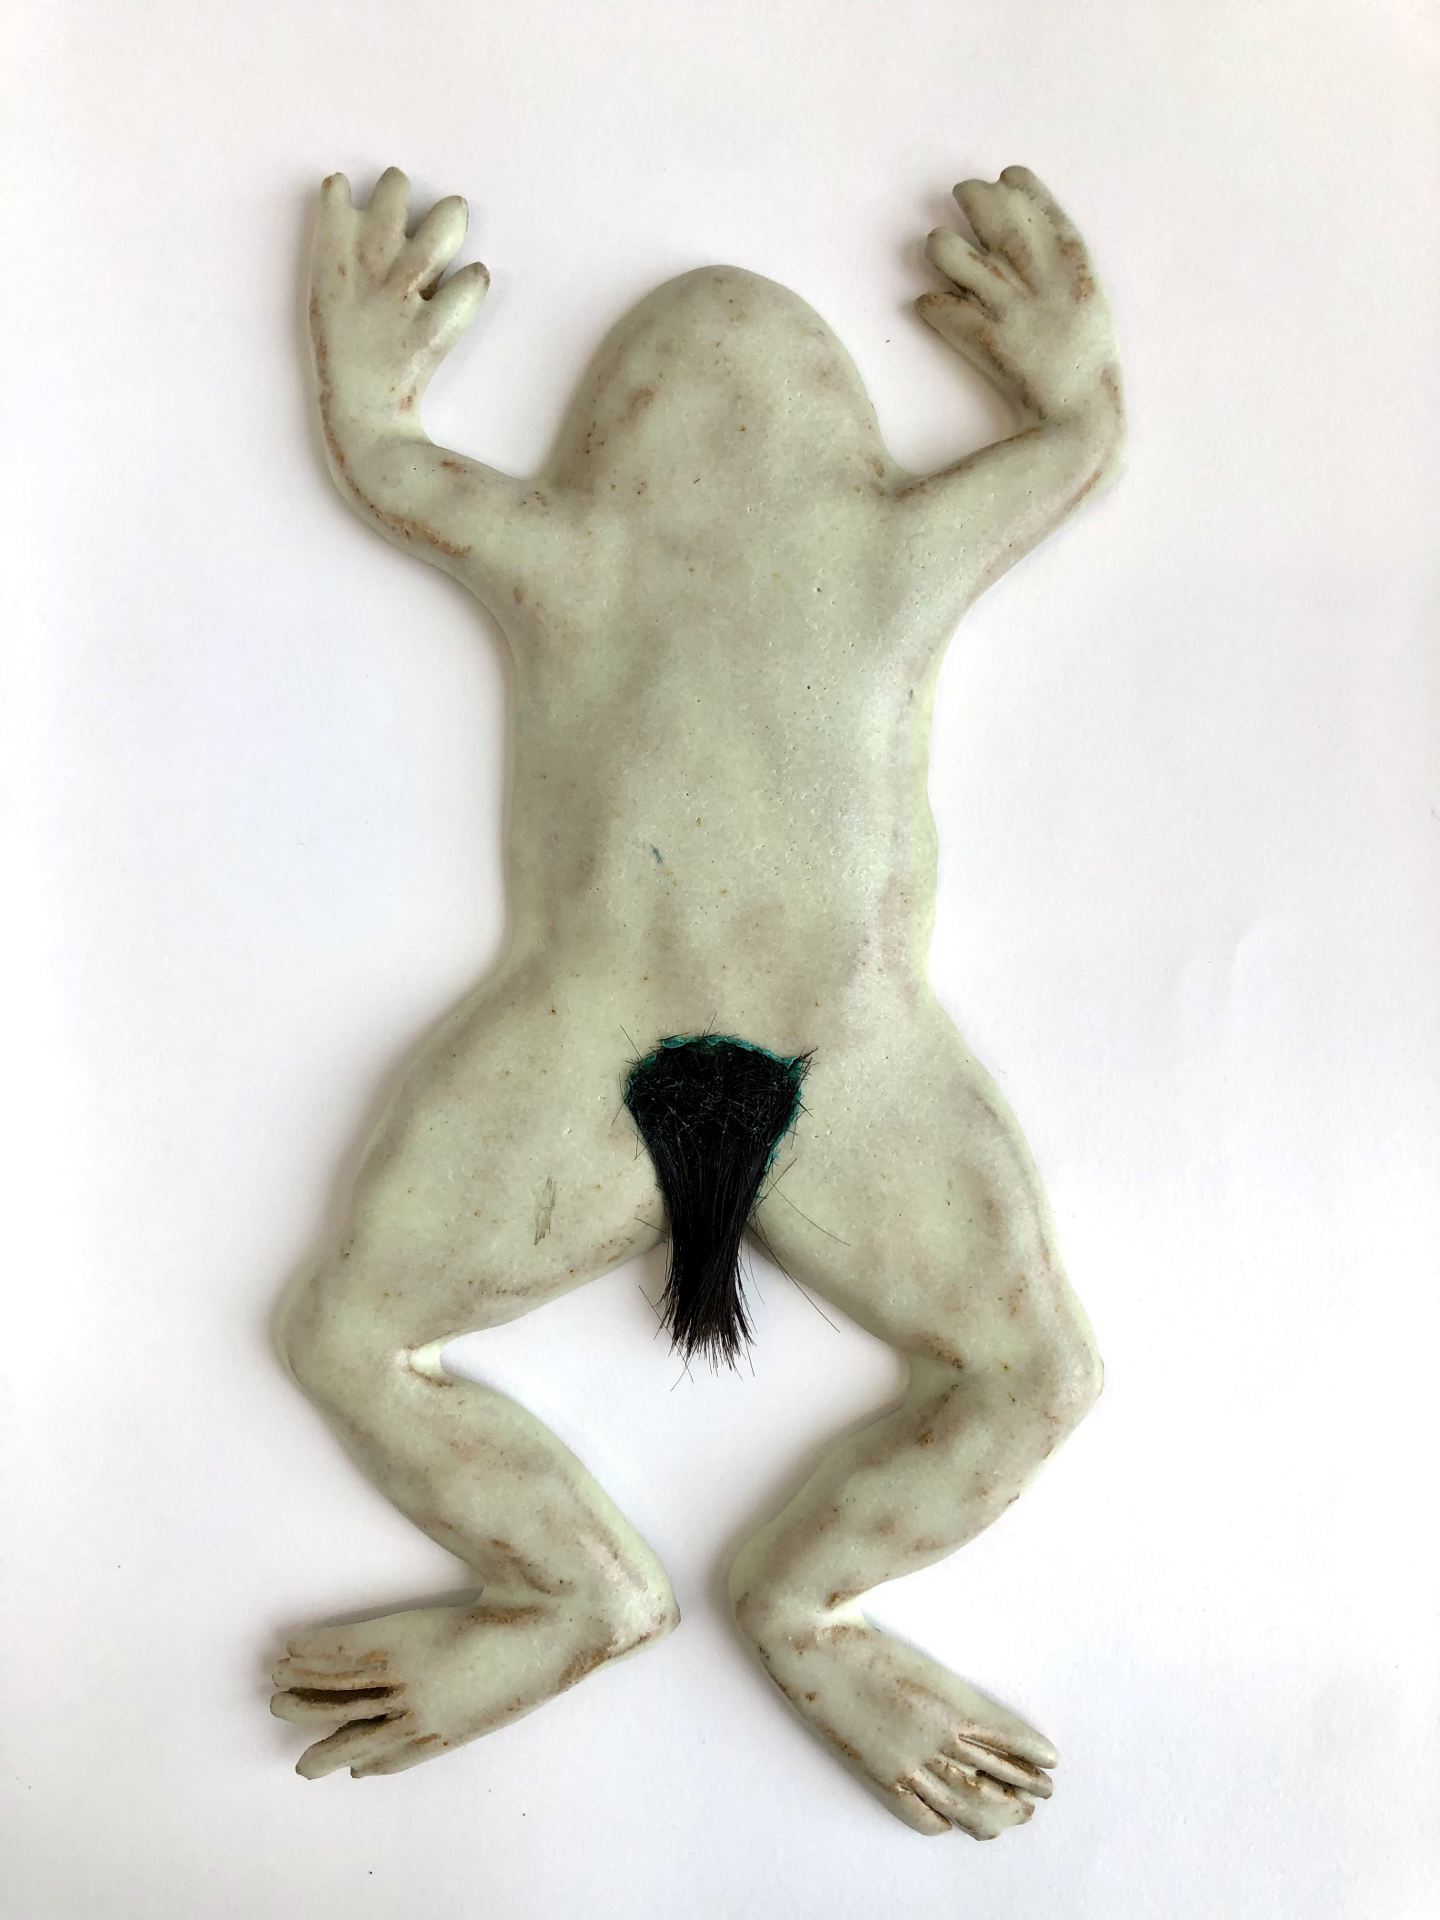 A ceramic frog with pubic hair hangs on a wall.